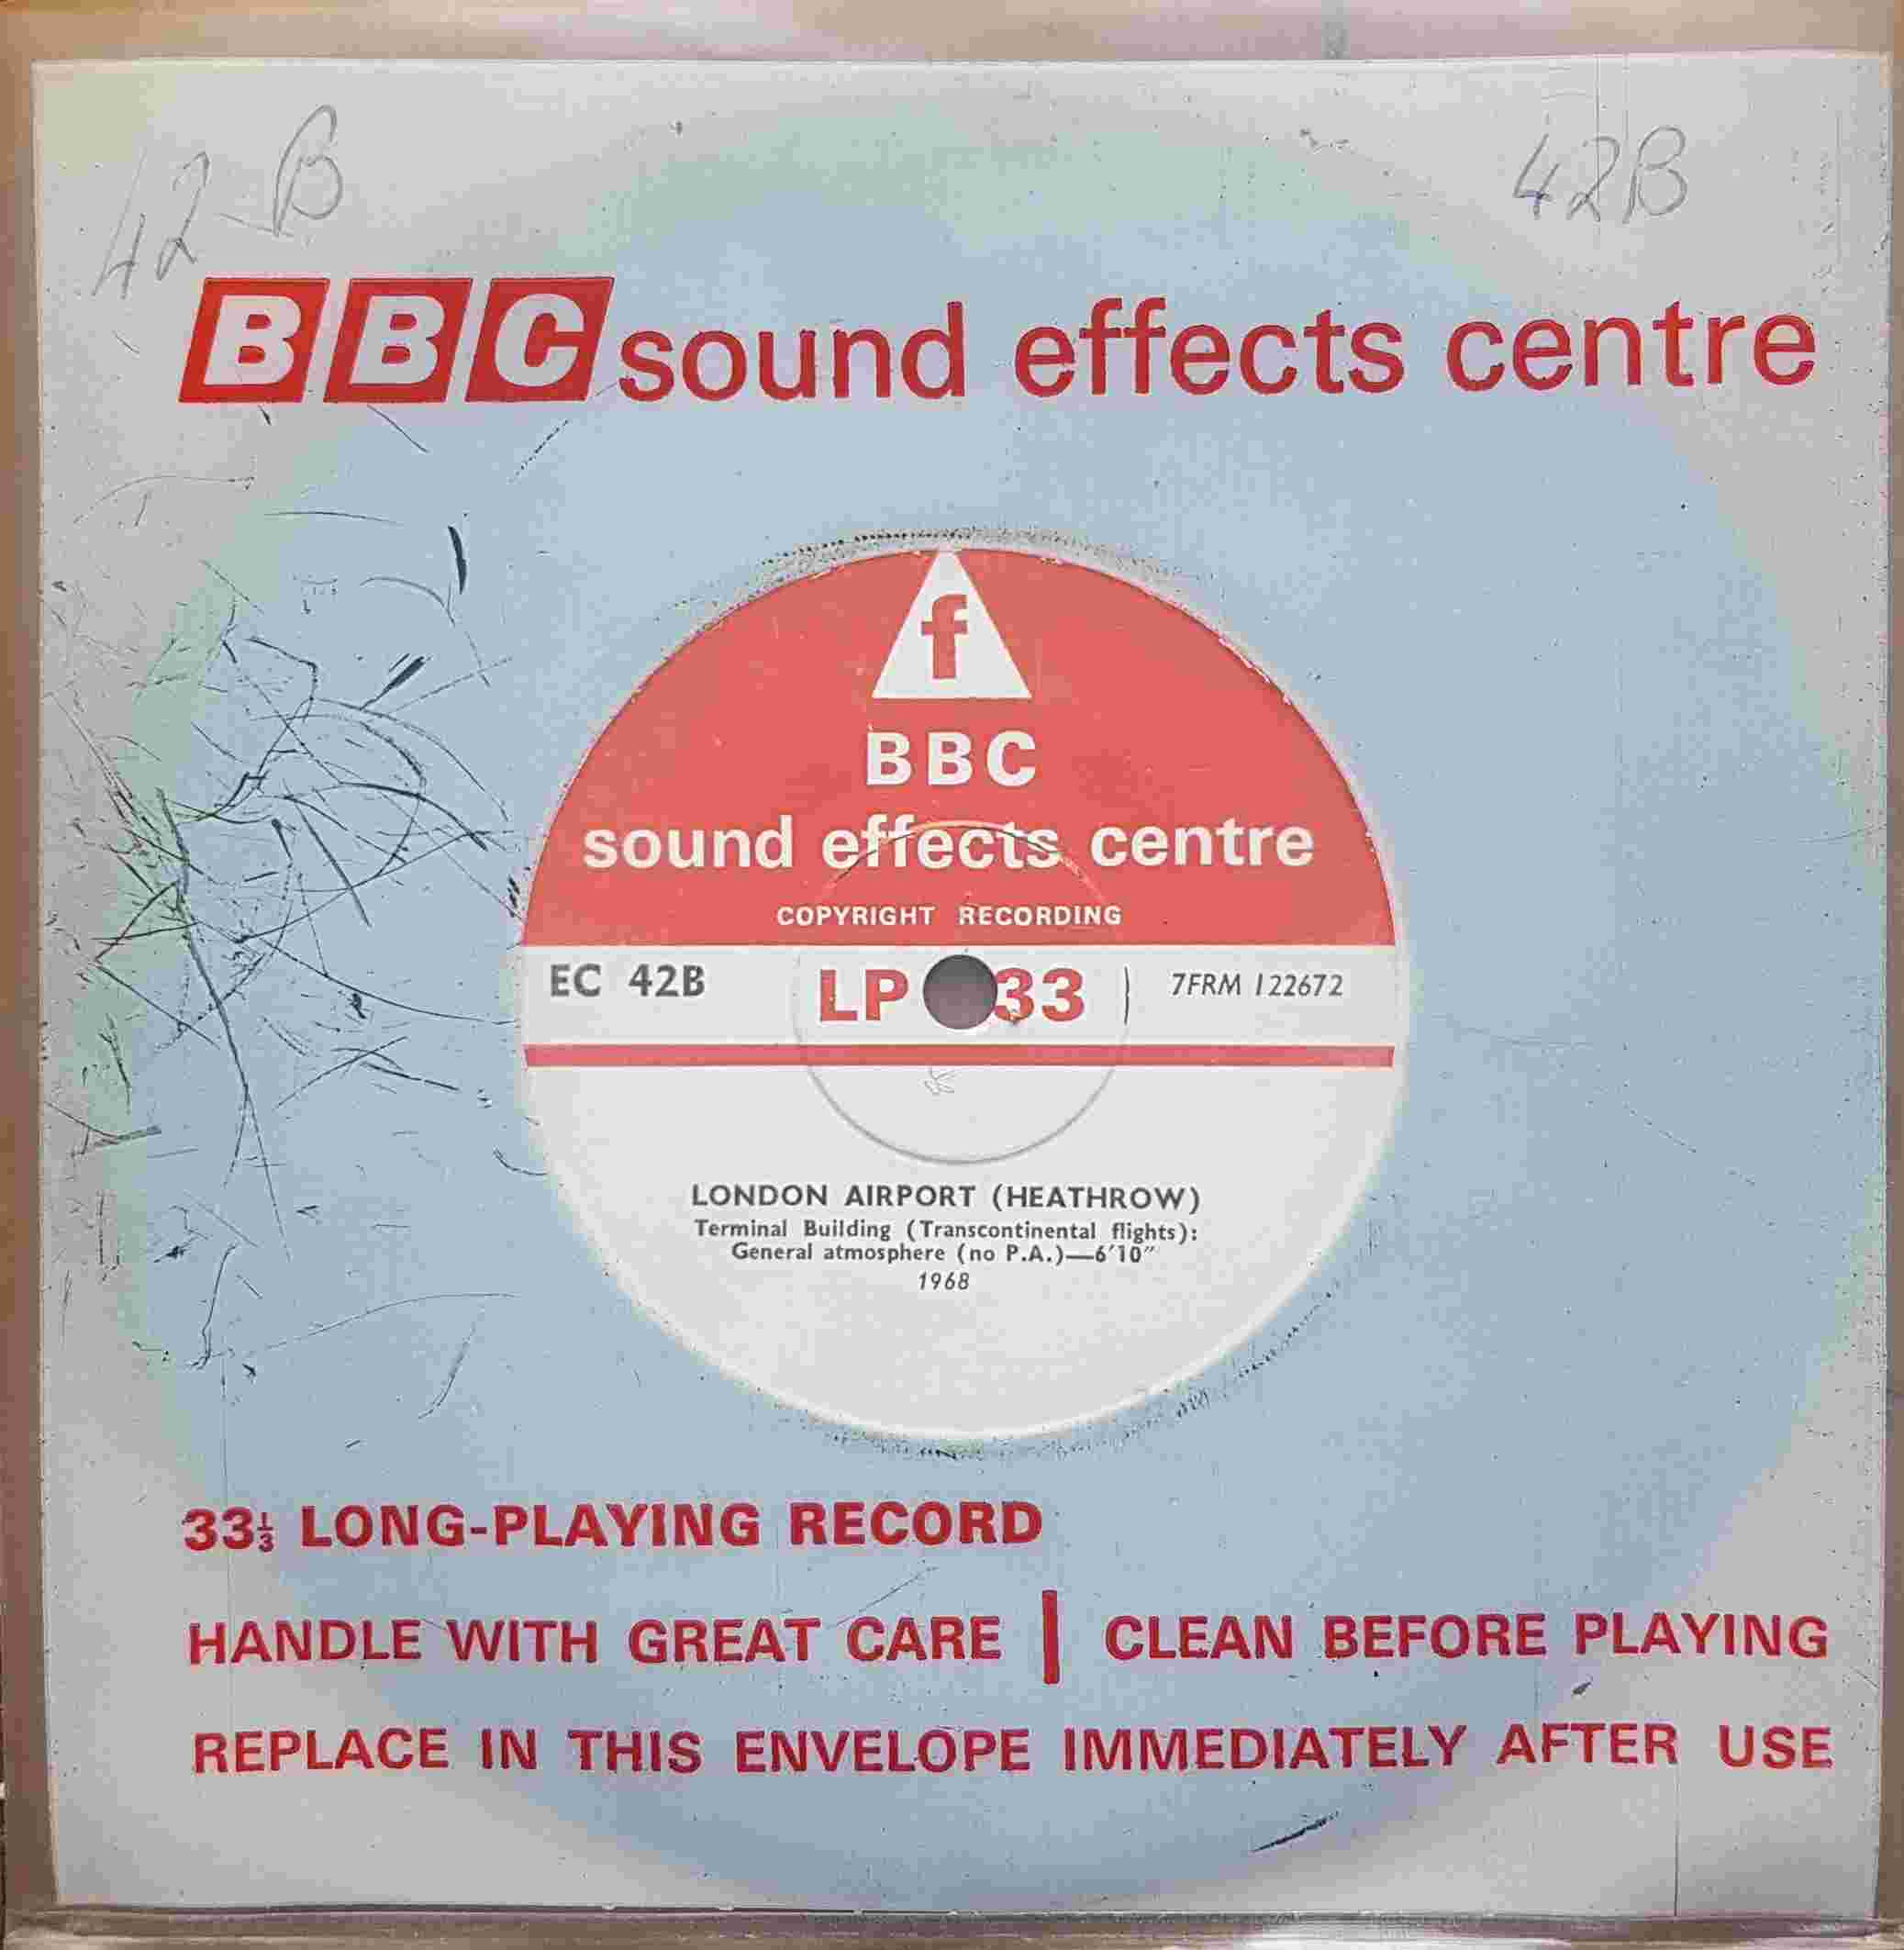 Picture of EC 42B London airport (Heathrow) 1968 by artist Not registered from the BBC records and Tapes library